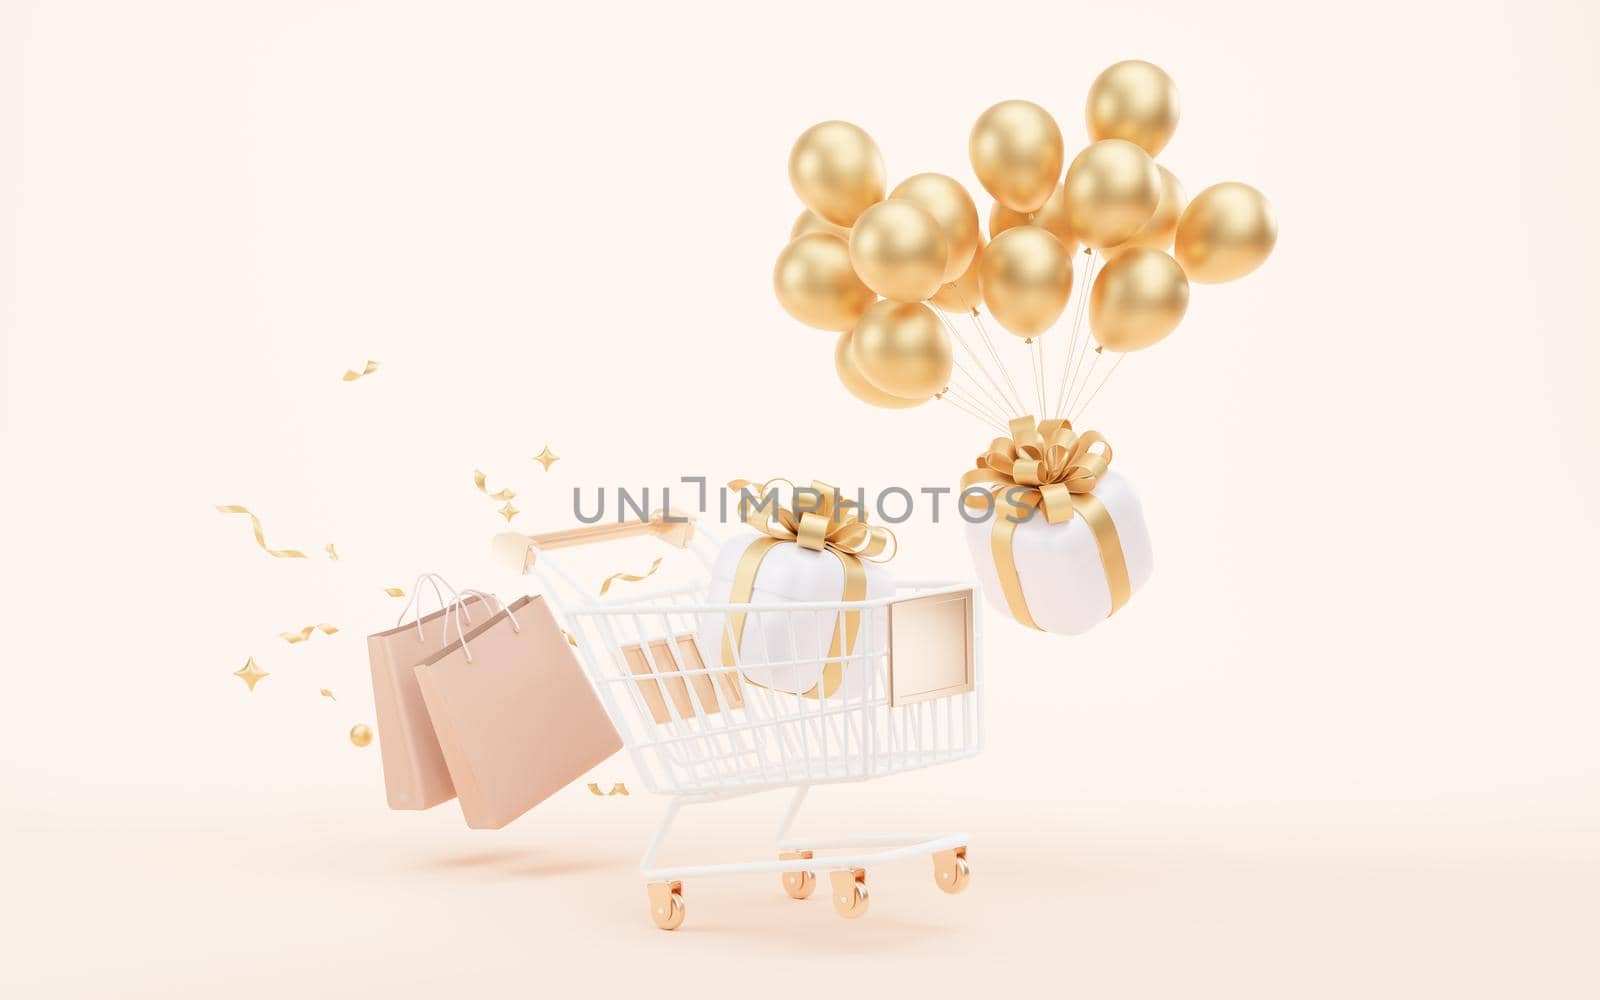 Shopping cart with gift boxes, 3d rendering. by vinkfan